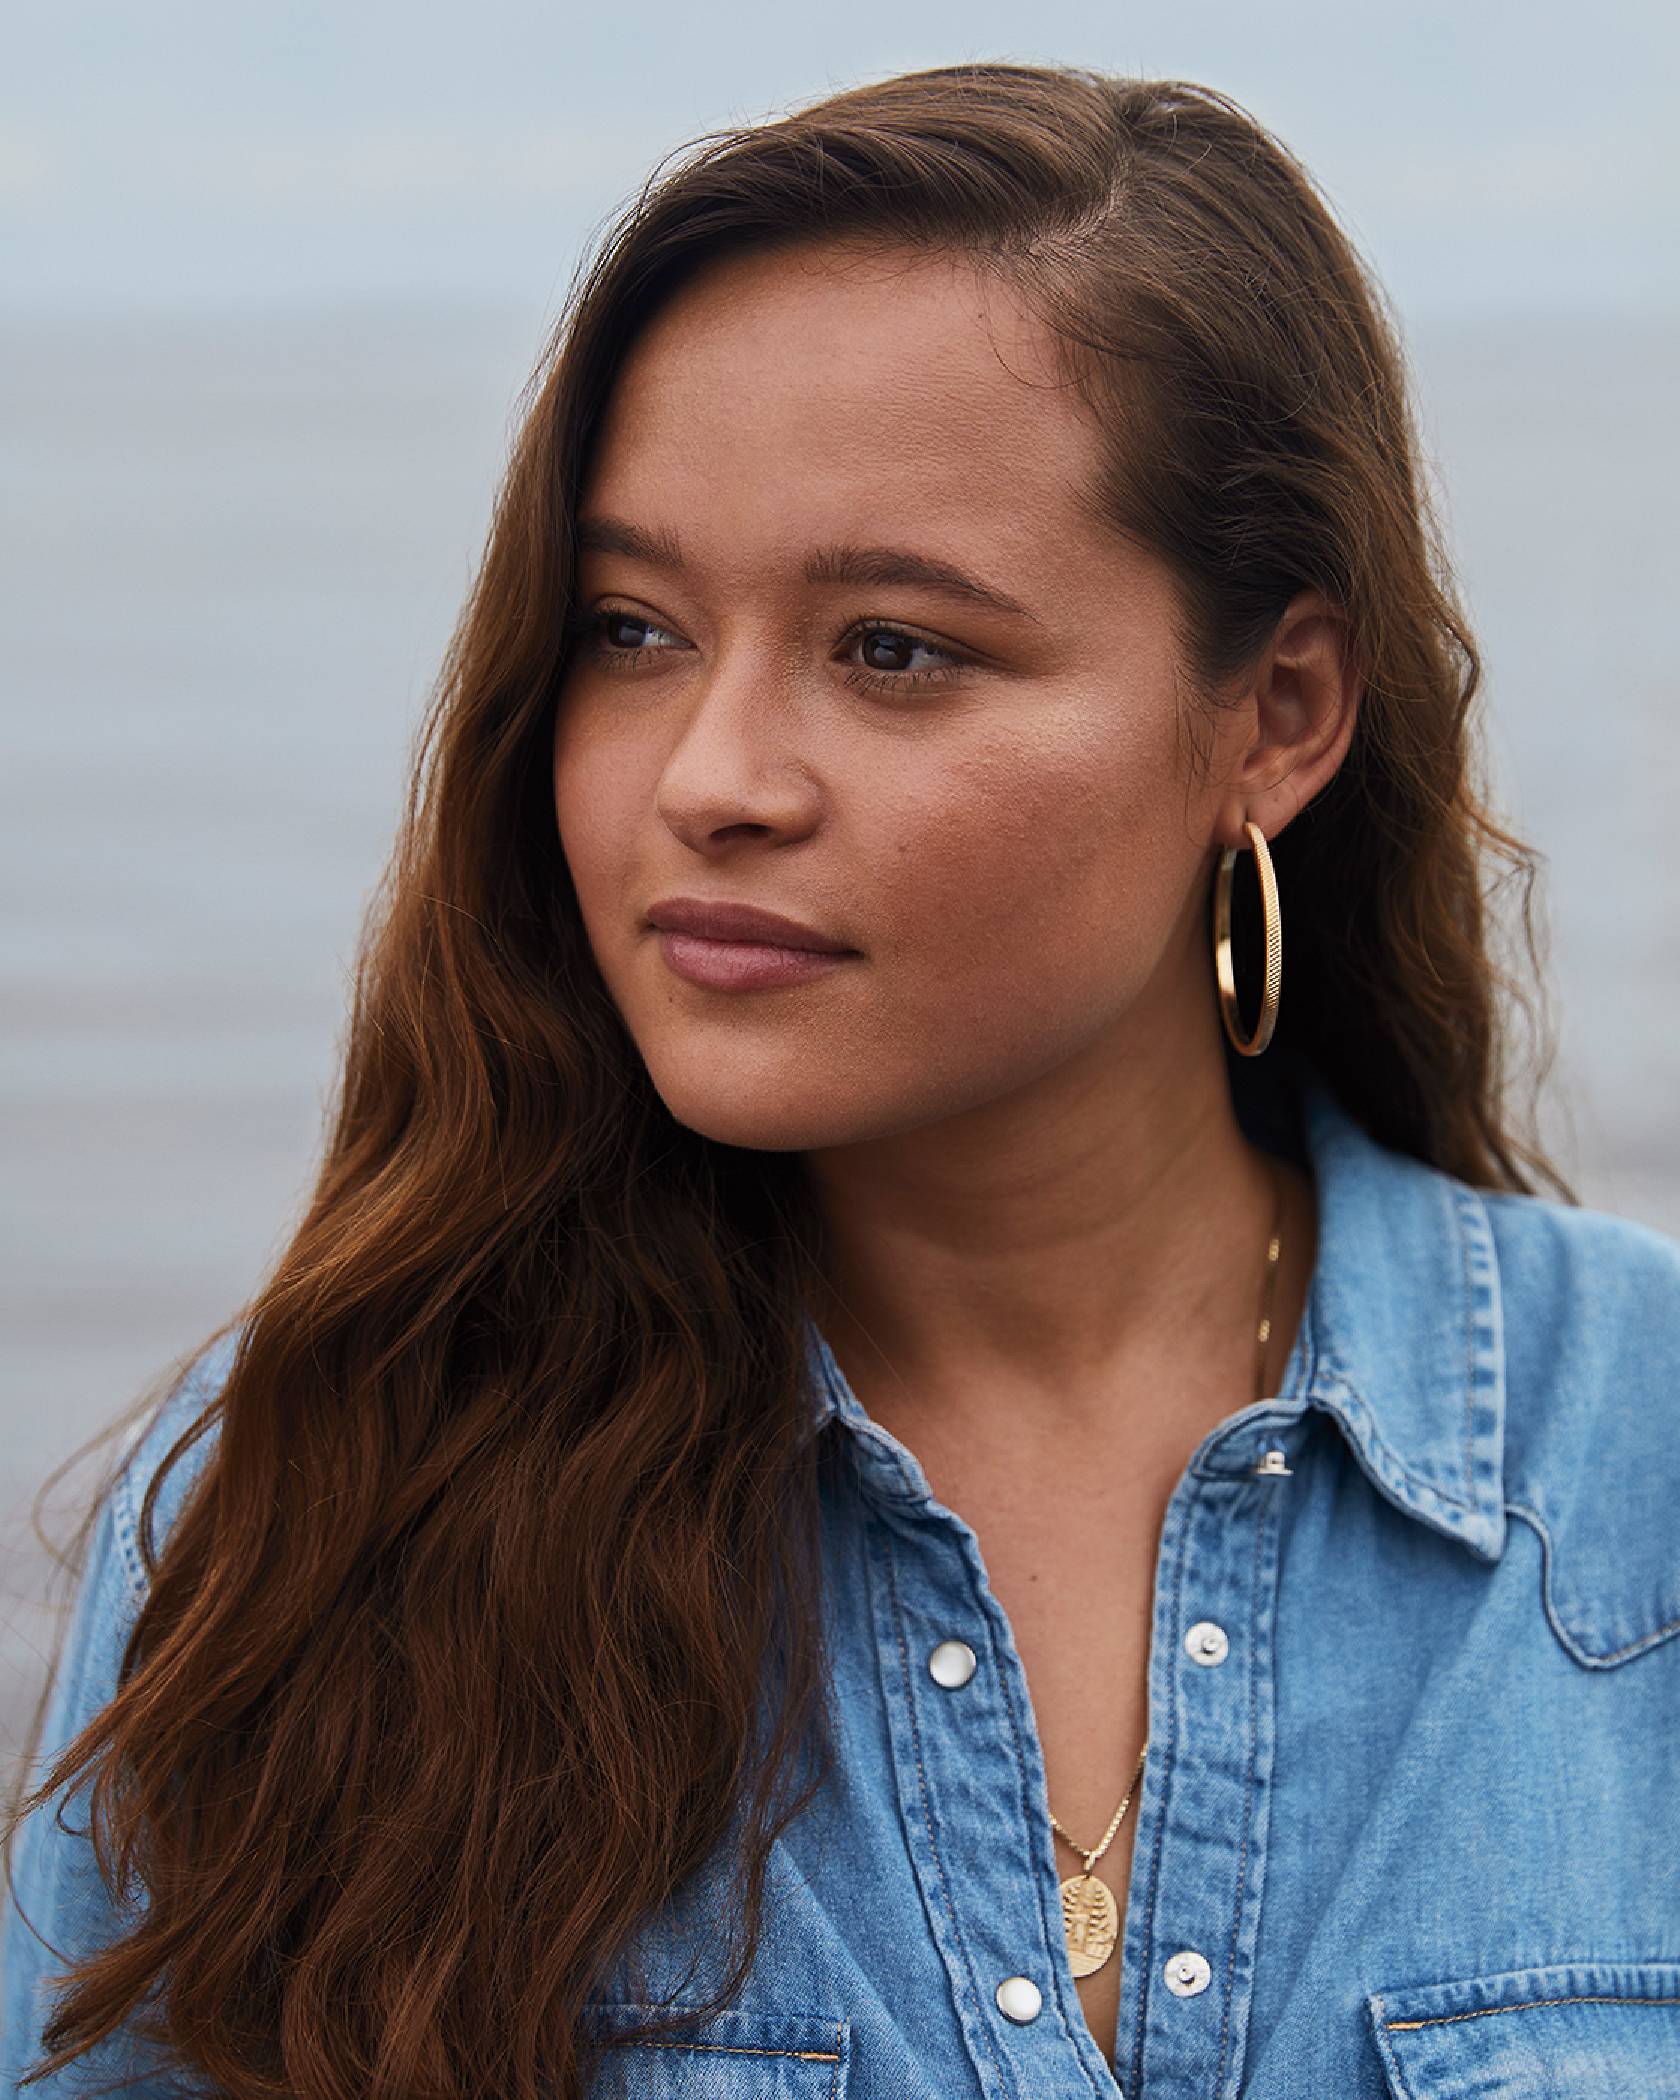 A portrait shot of Melati wearing a Levi's button up shirt, a gold circle necklace and gold hoop earrings